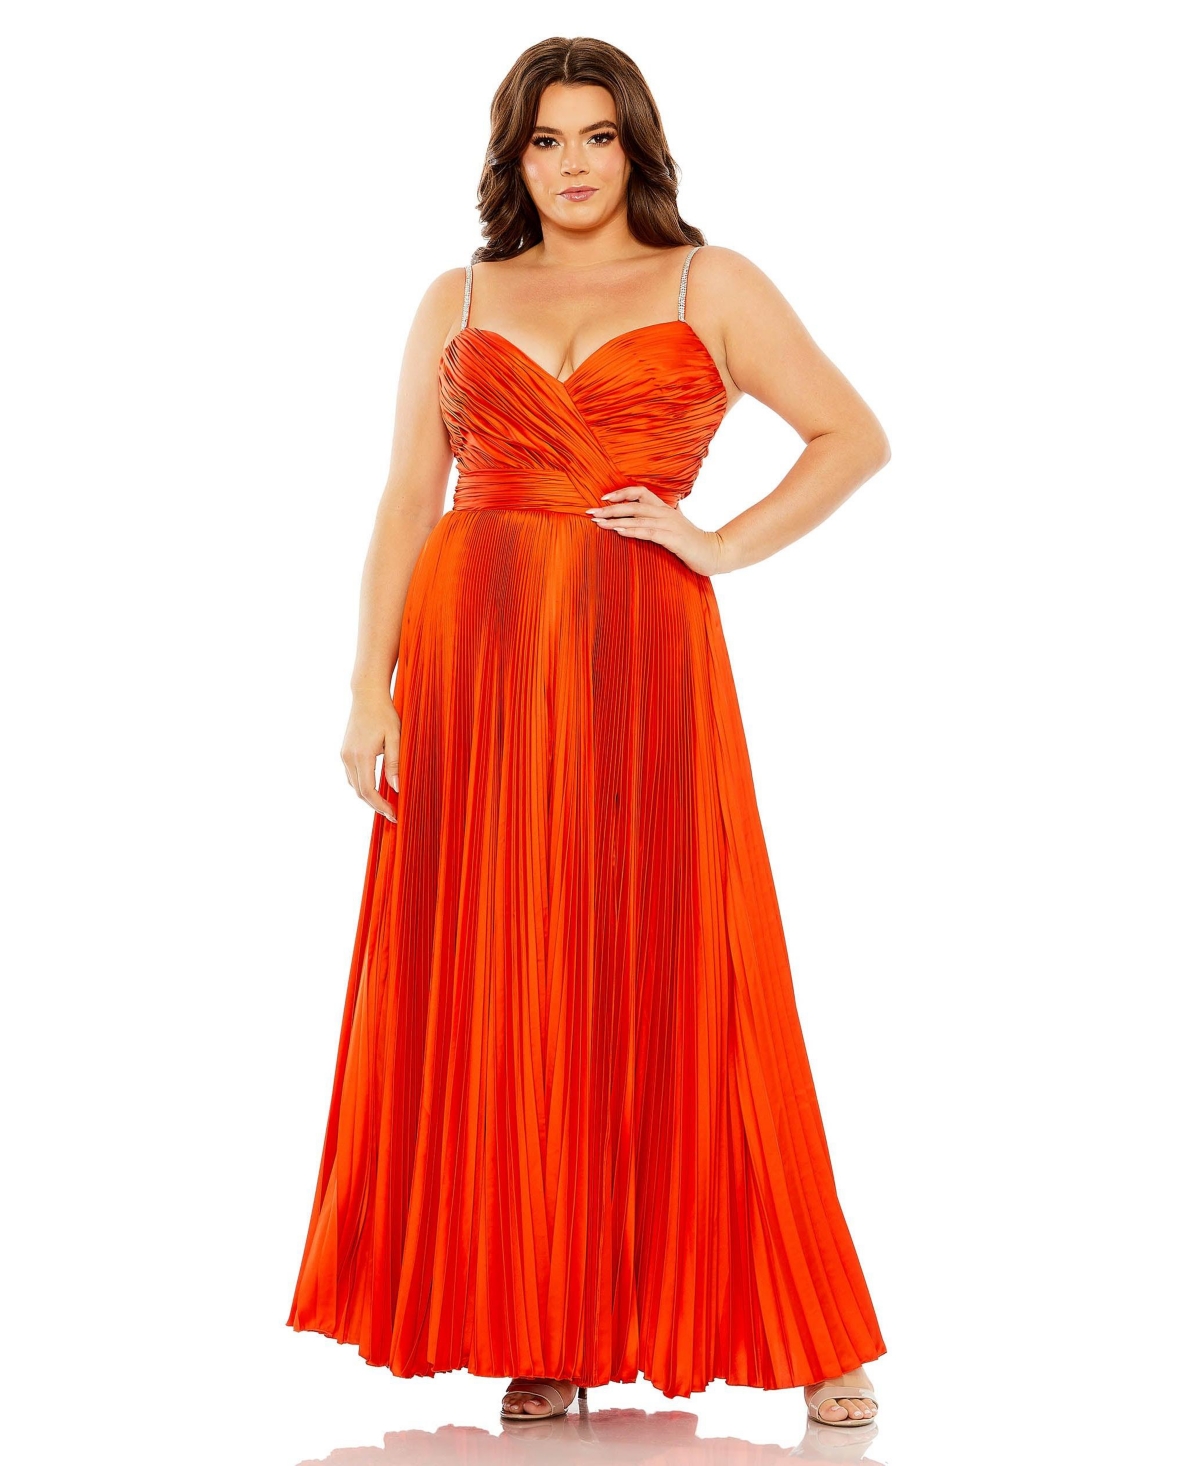 MAC DUGGAL WOMEN'S PLUS SIZE RHINESTONE STRAPPED EMBELLISHED PLEATED GOWN